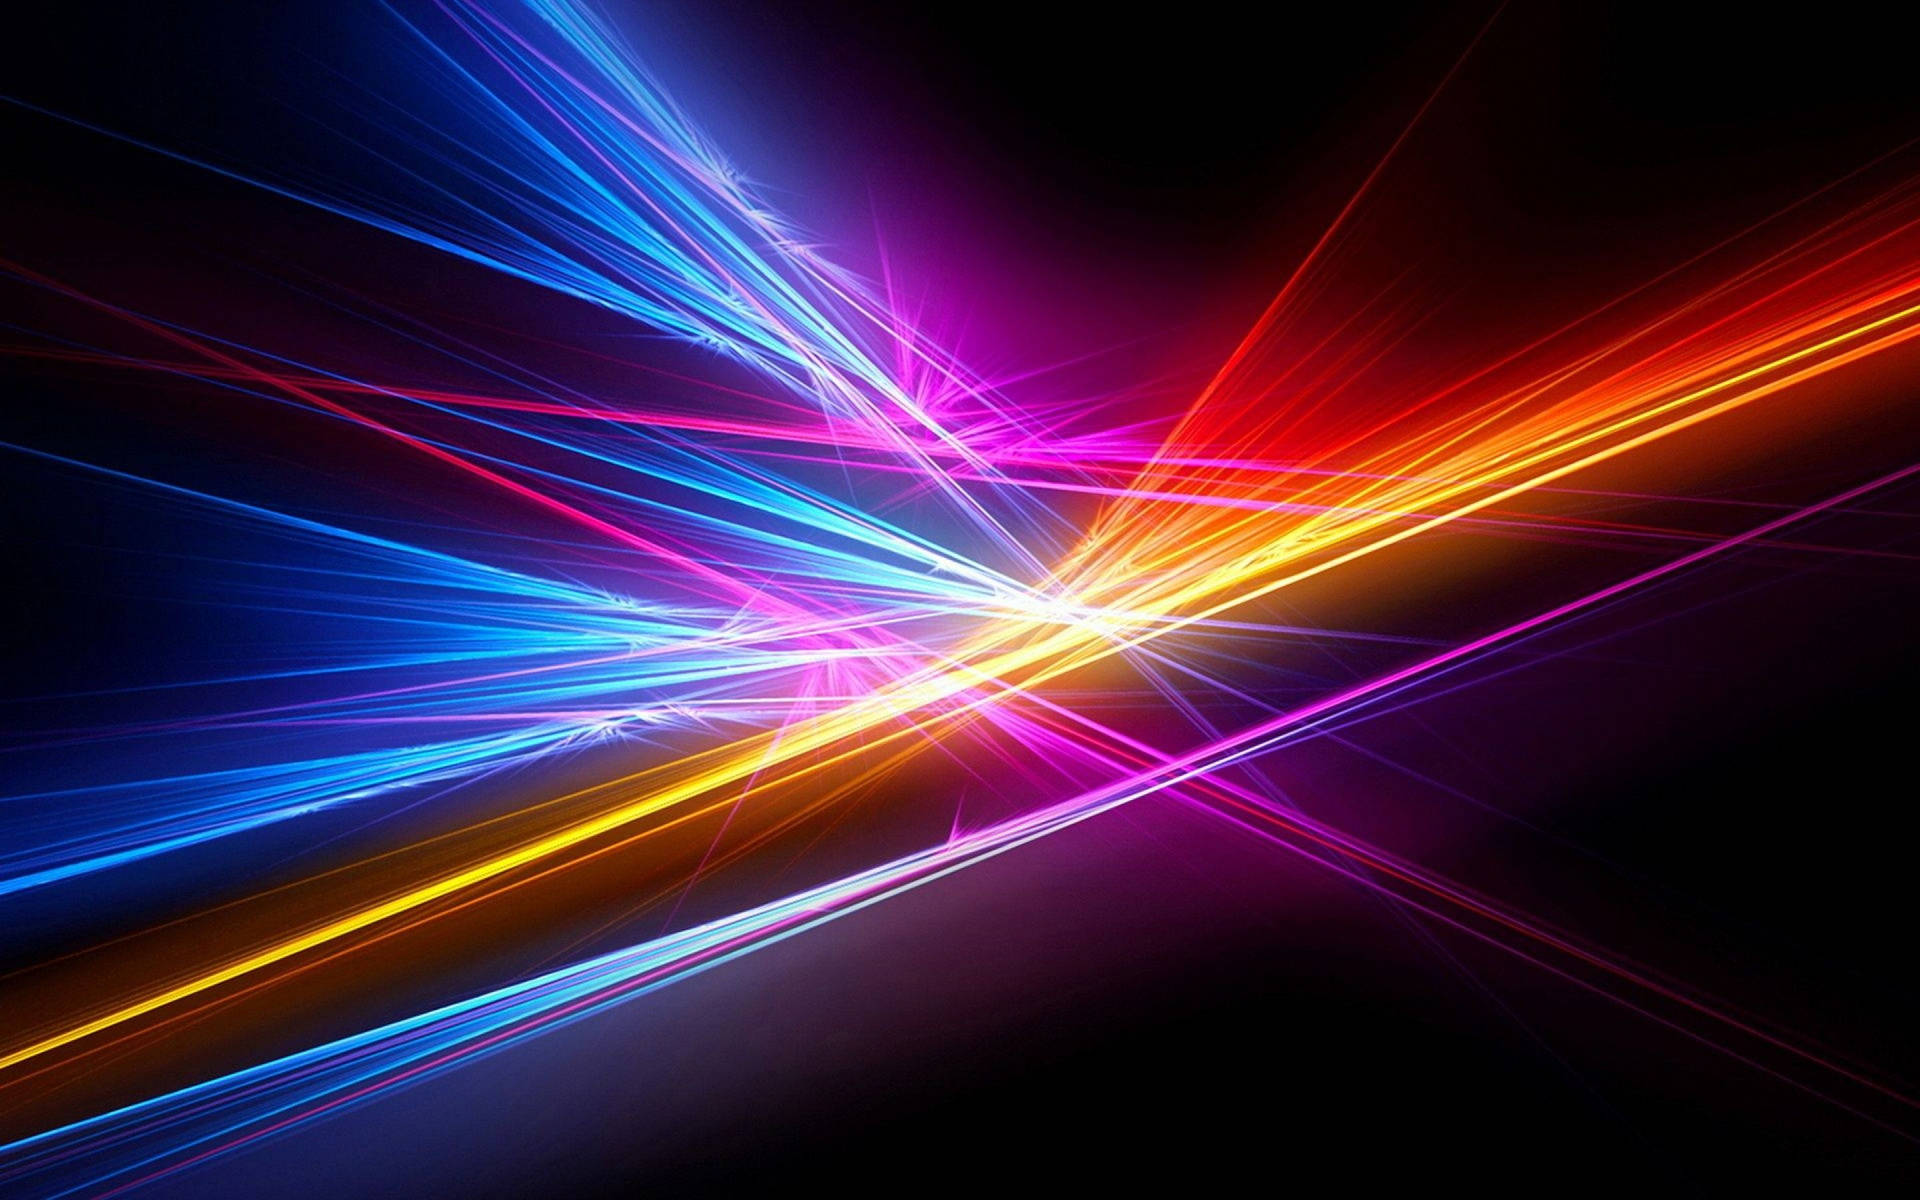 A Colorful Light Beam On A Black Background